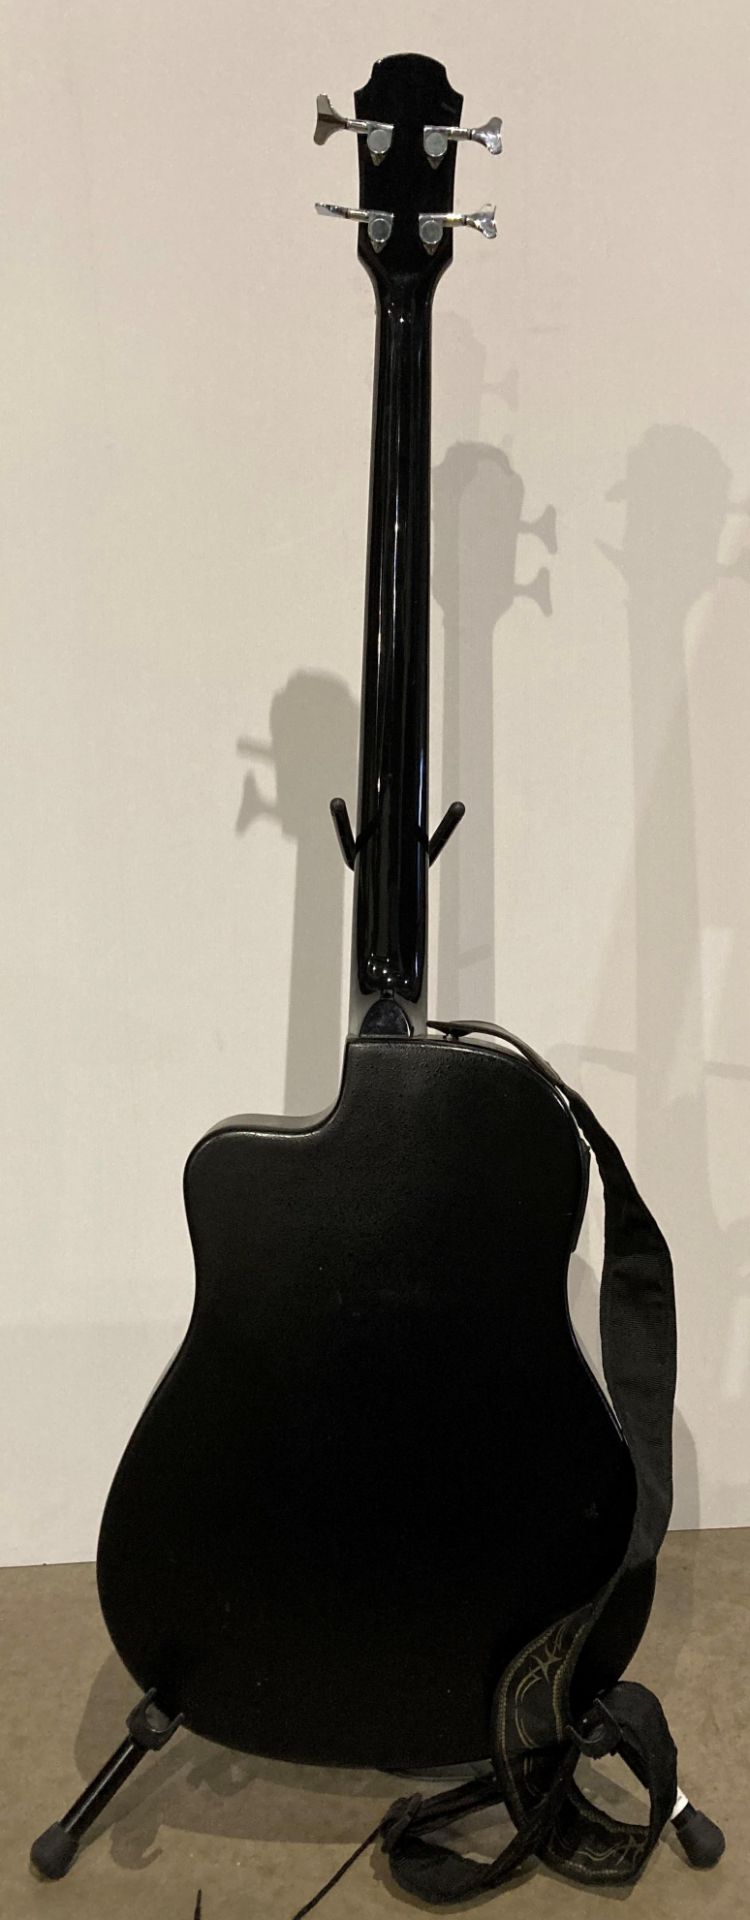 Aria AMB-50B electro acoustic bass guitar in black, - Image 3 of 4